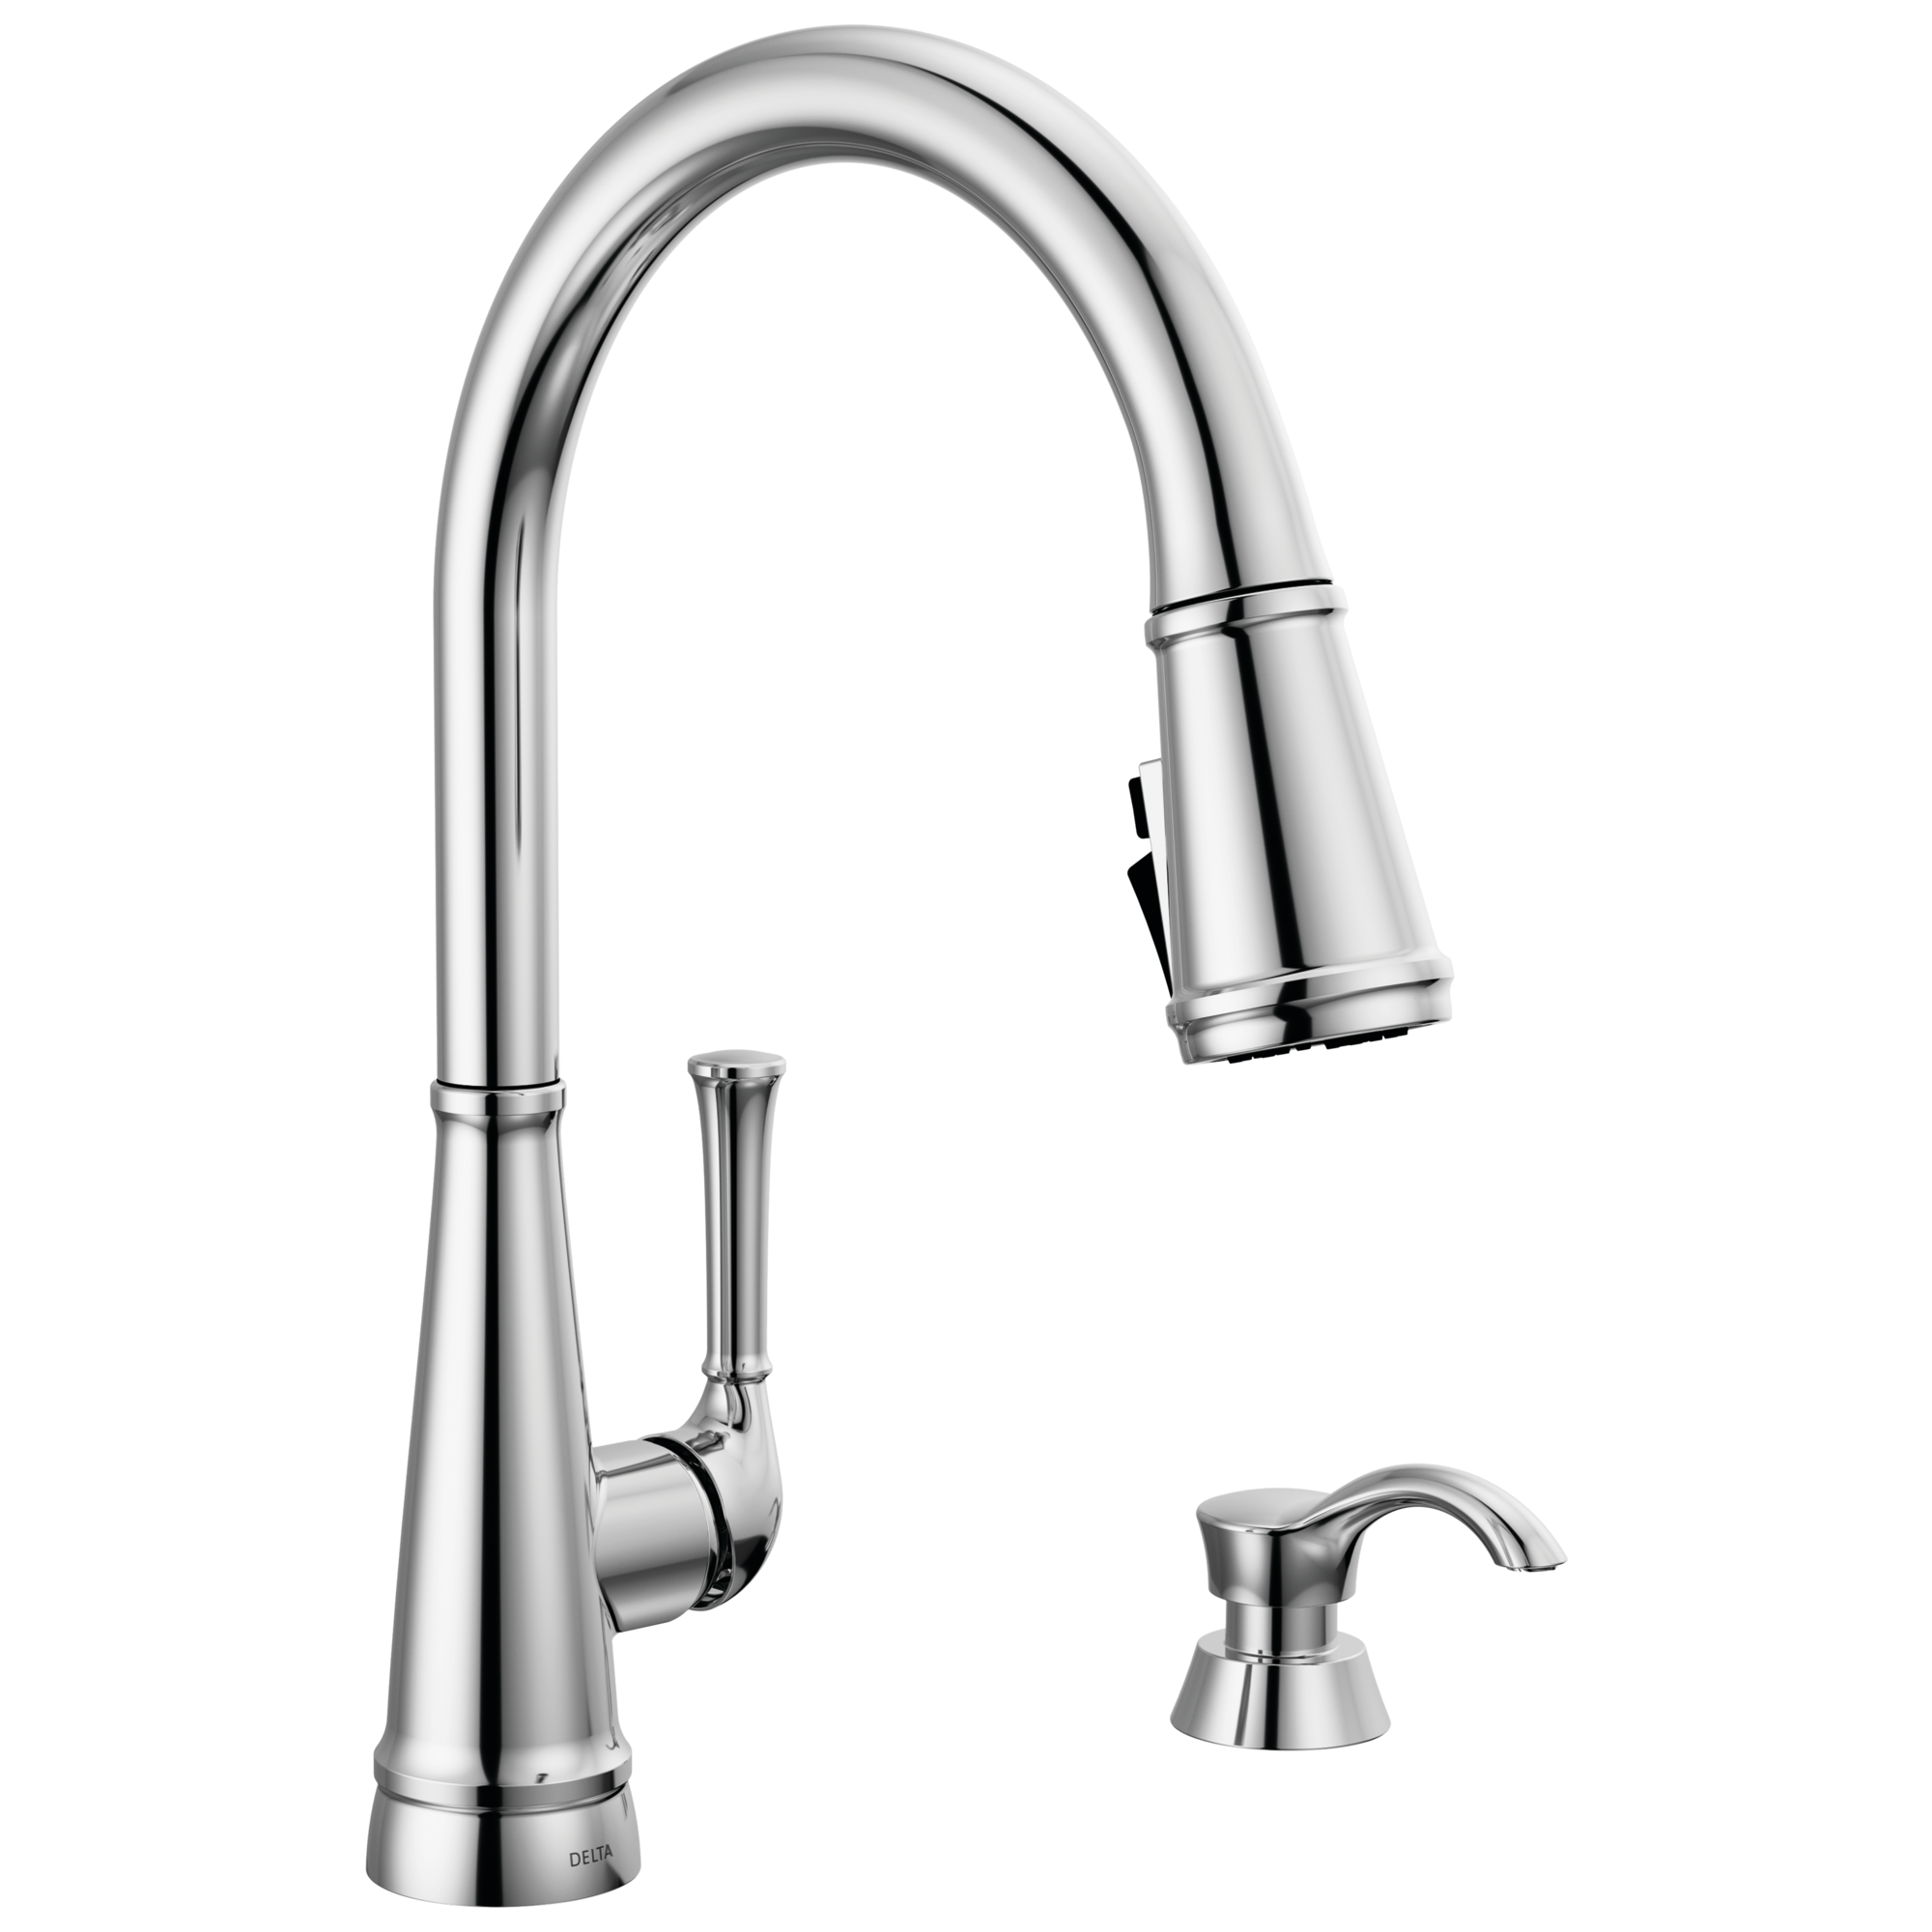 Alpen Chrome Single Handle Pull-down Kitchen Faucet with Deck Plate and Soap Dispenser Included Rubber | - Delta 19814Z-SD-DST